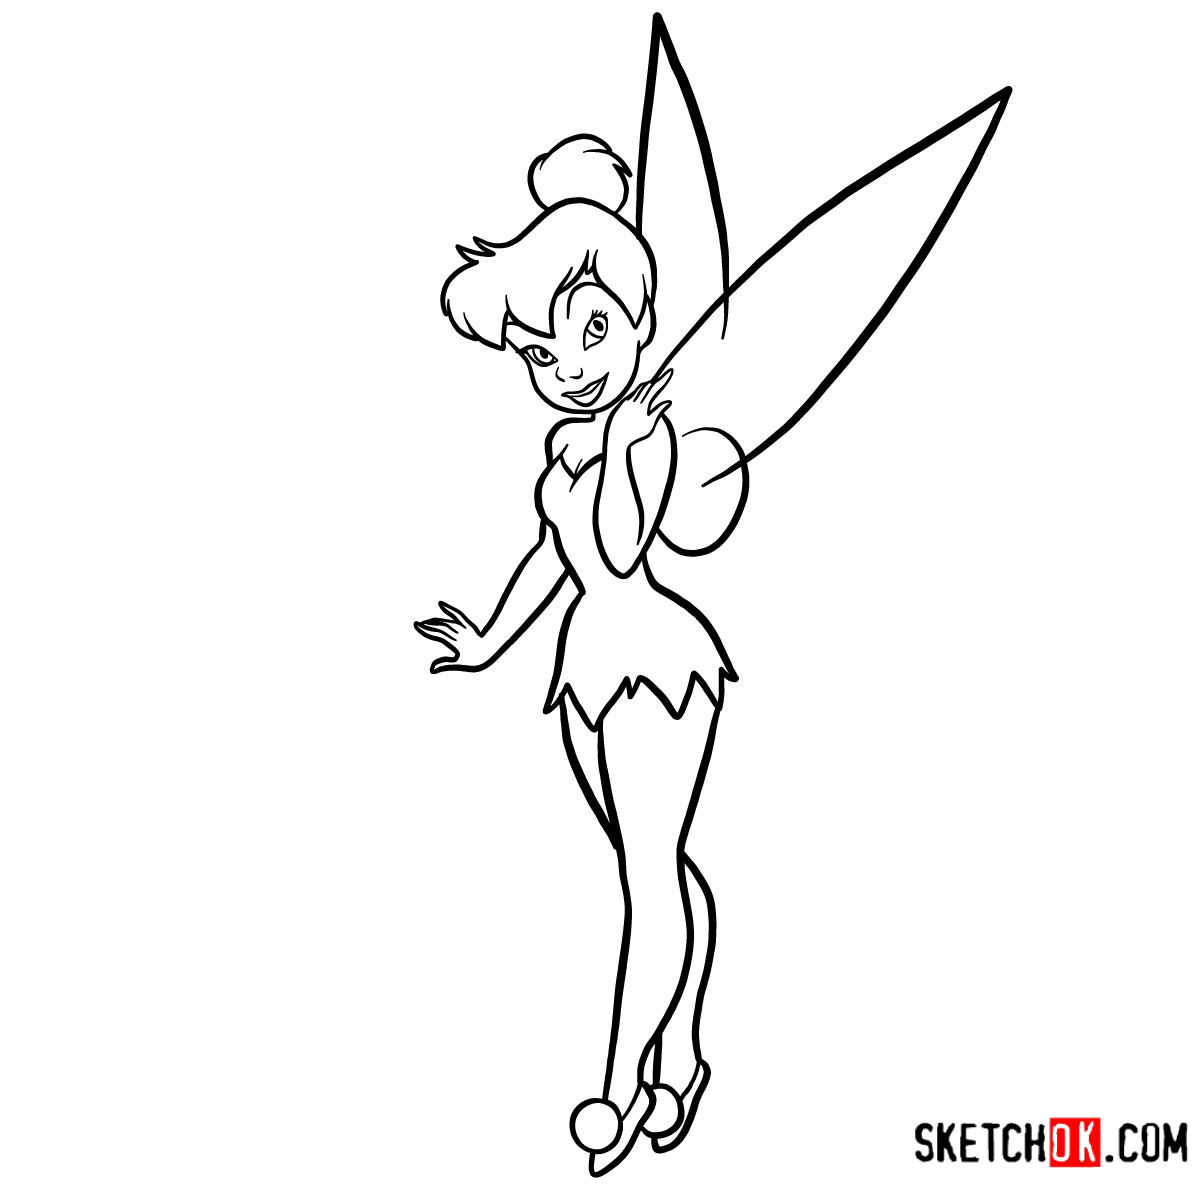 How to draw Tinker Bell